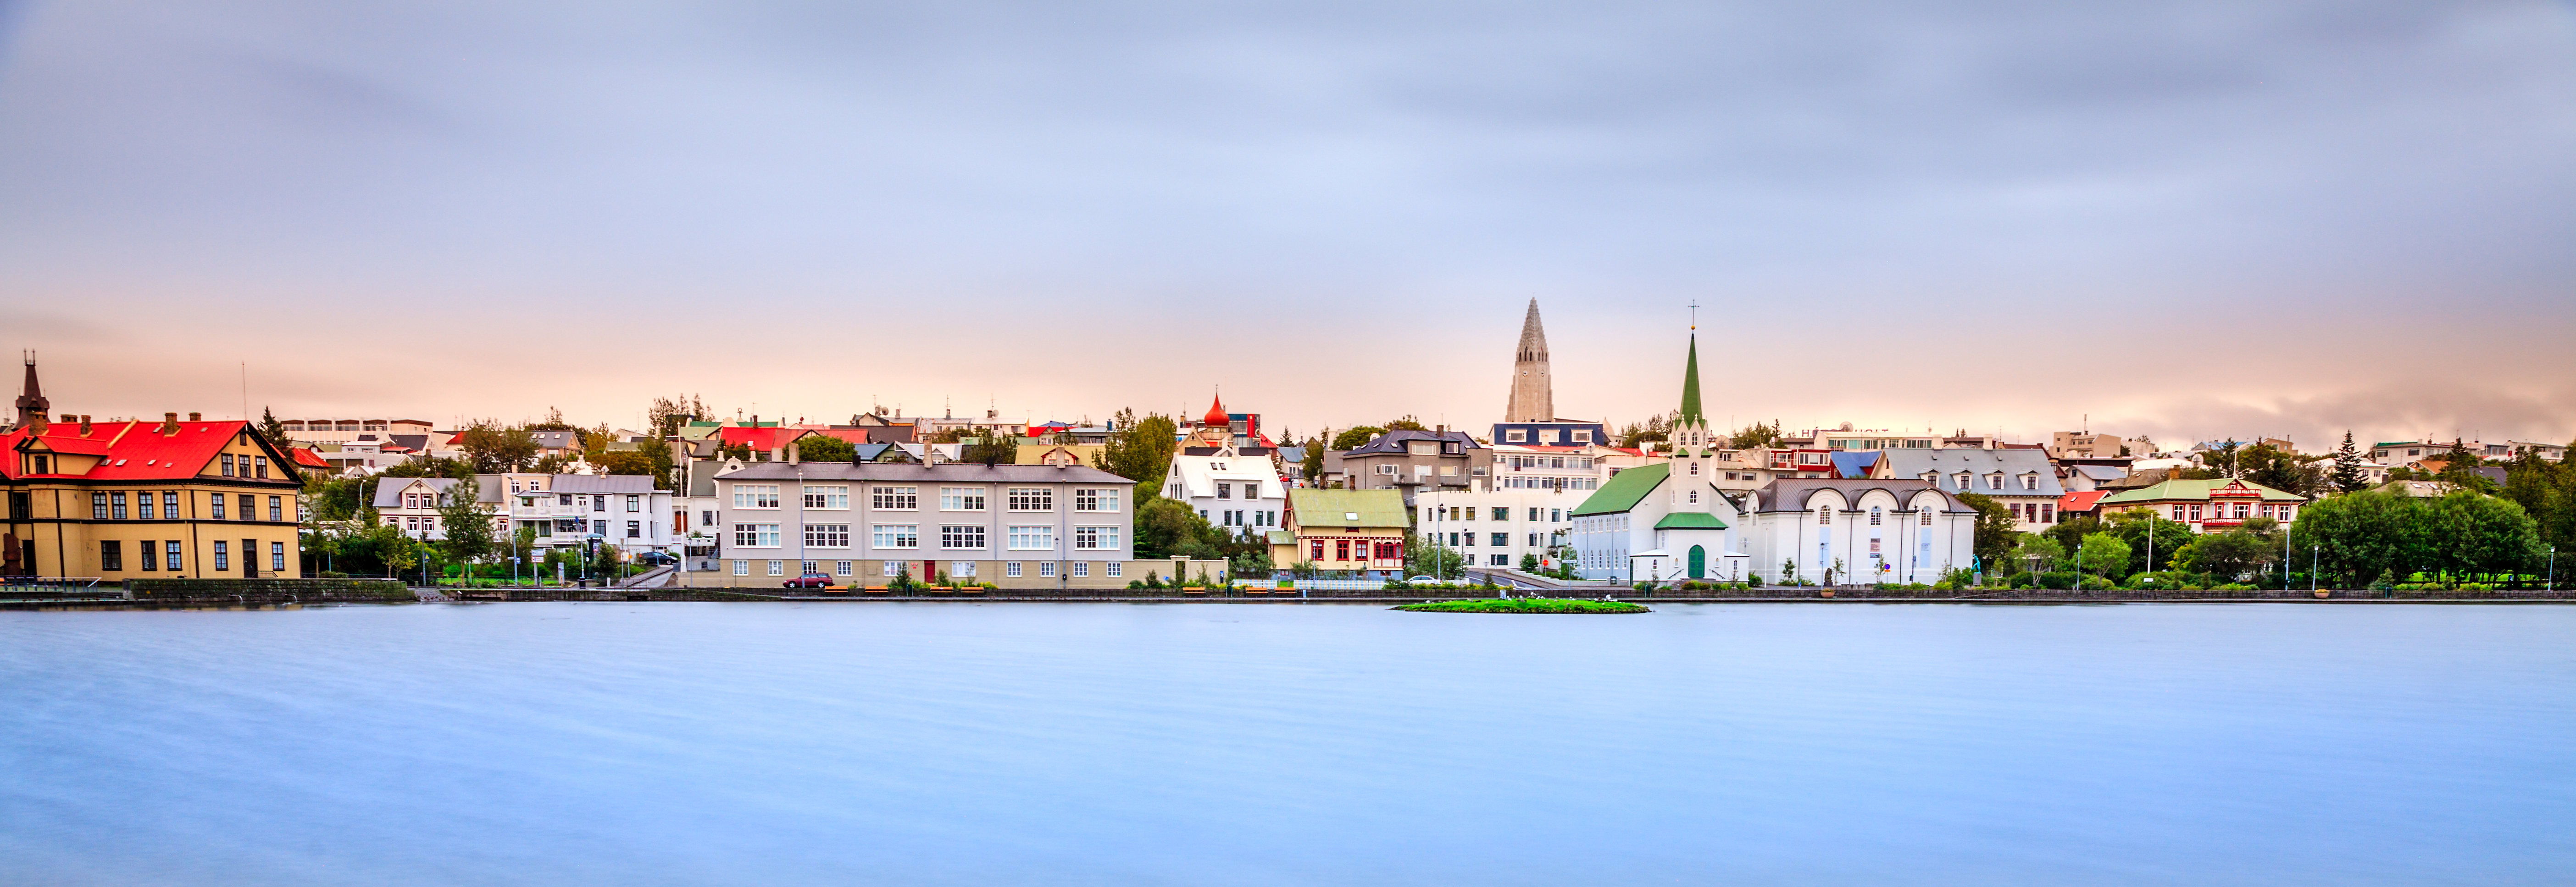 Plan Your Family Vacation in Iceland with My Travel Guide - Reykjavik Skyline